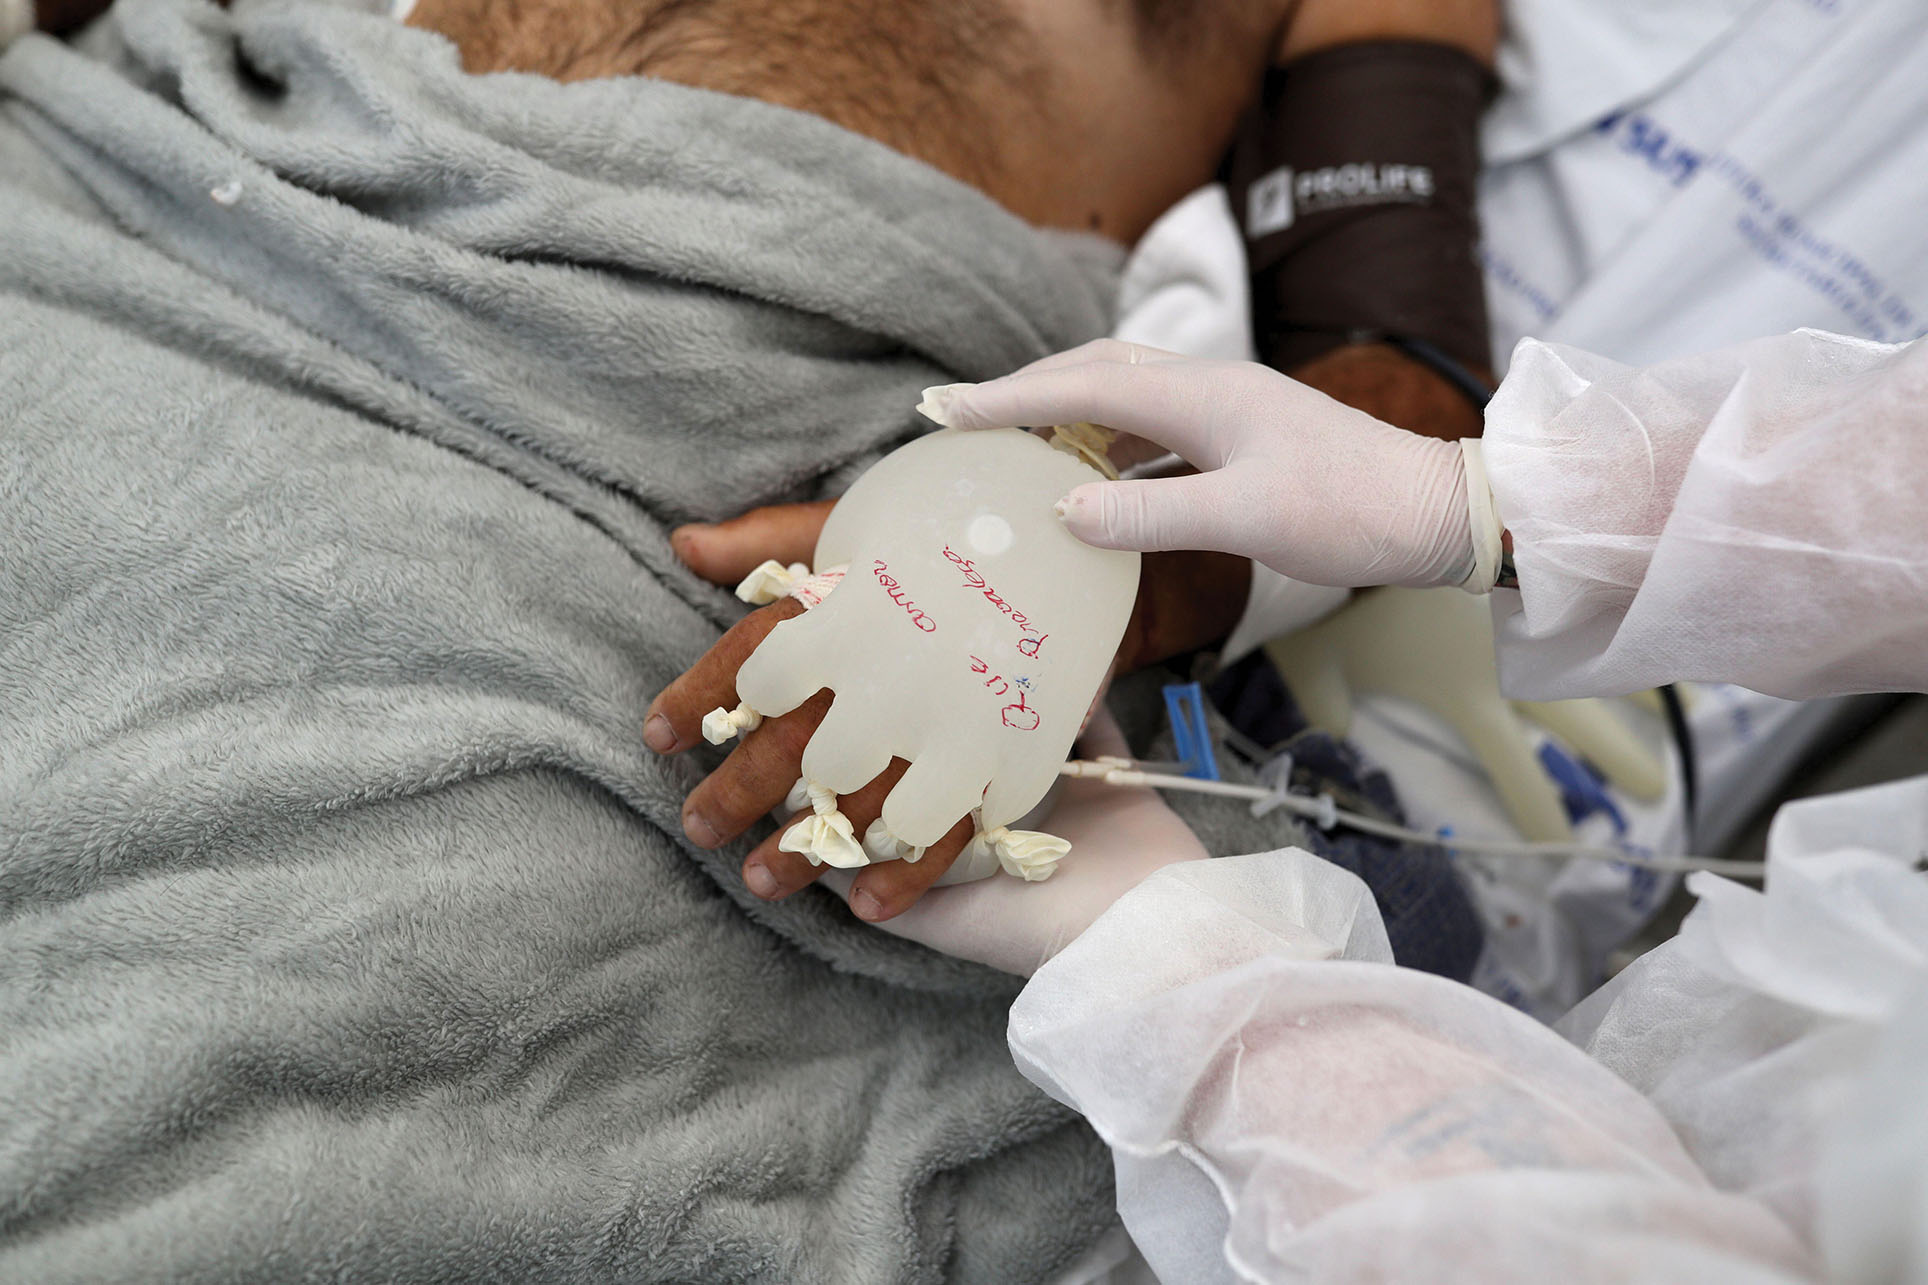 A nurse puts a warm water-filled glove on a Covid-19 patient in Brazil,  April 2021. The phrase on the glove reads “May love prevail.” (Photo by Amanda Perobelli/REUTERS.)